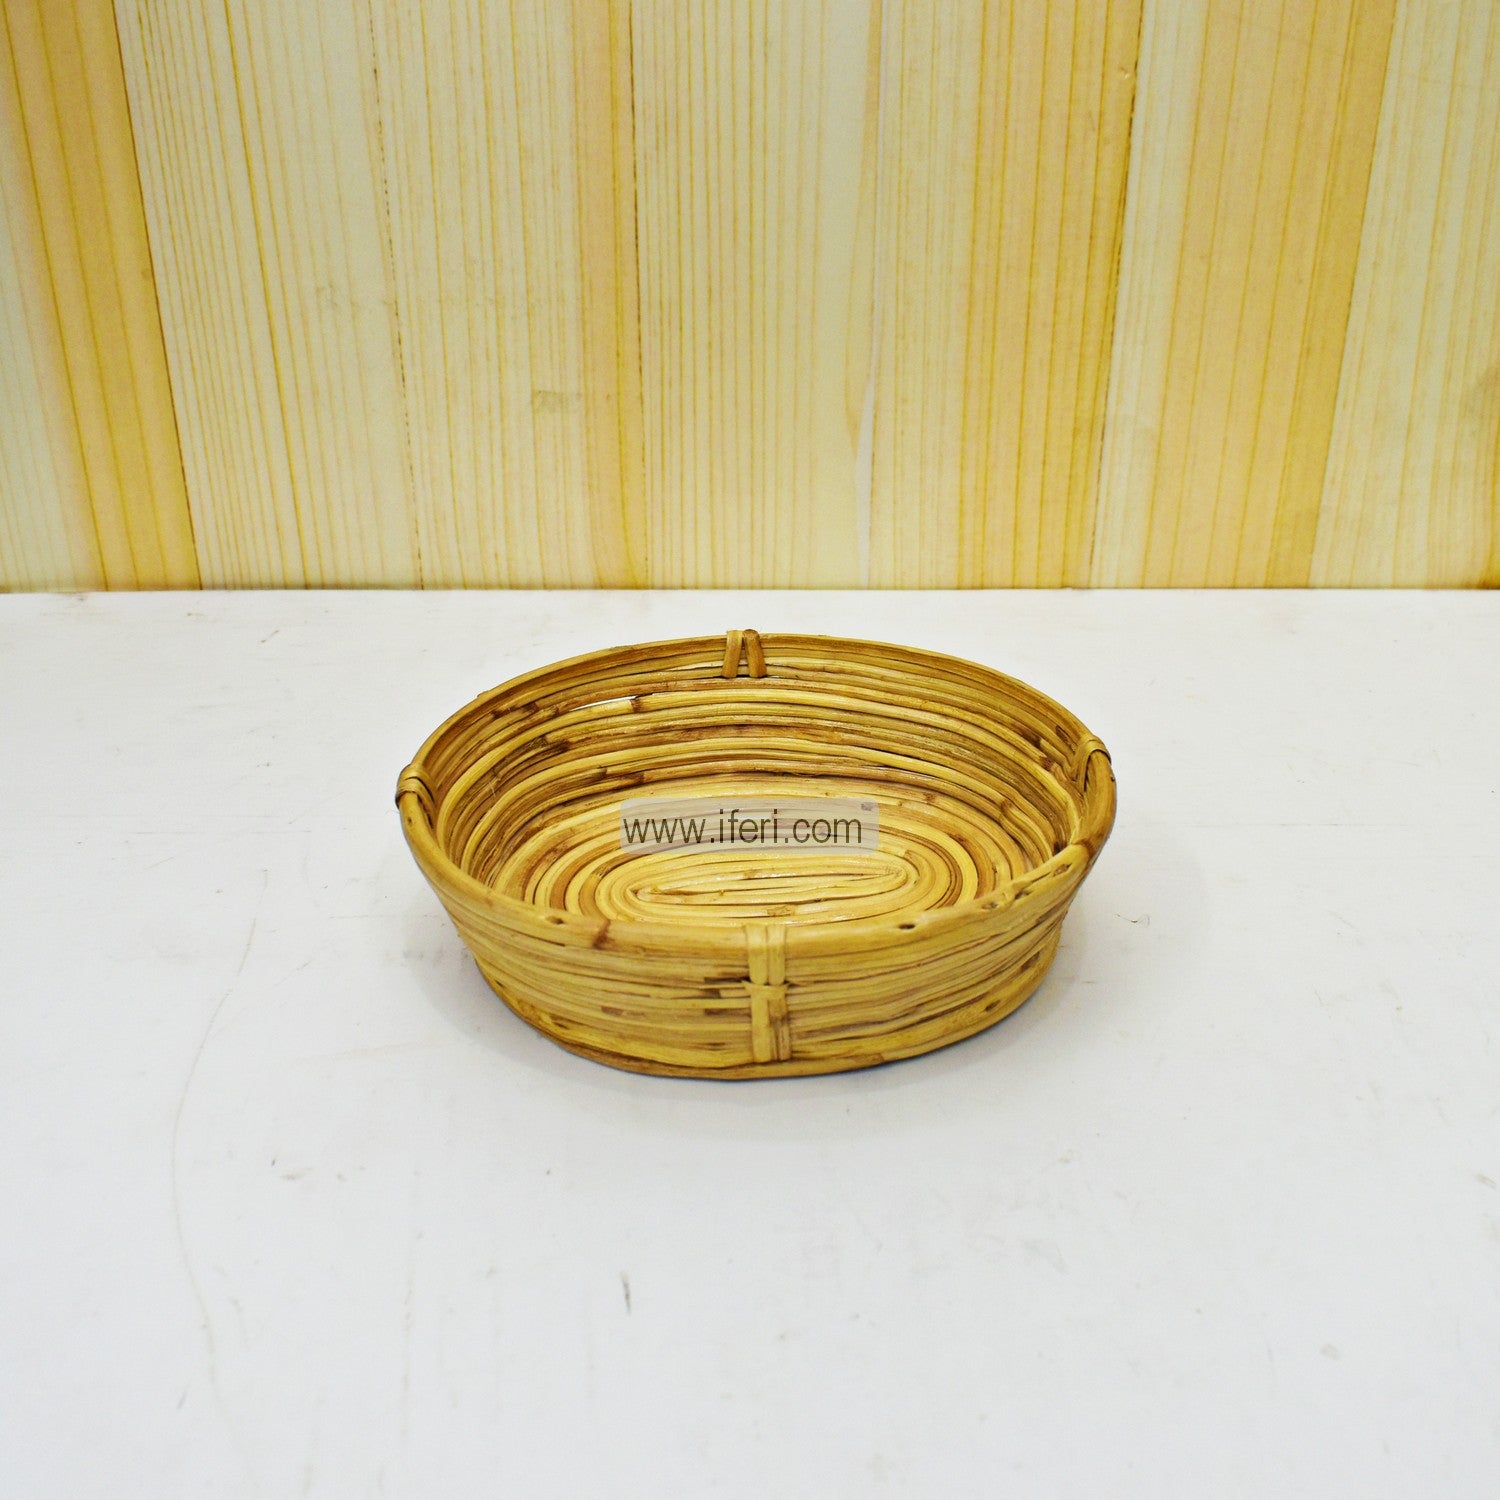 8 inch Oval Bread and Roti Basket for Kitchen and Dining Serving ALF0990